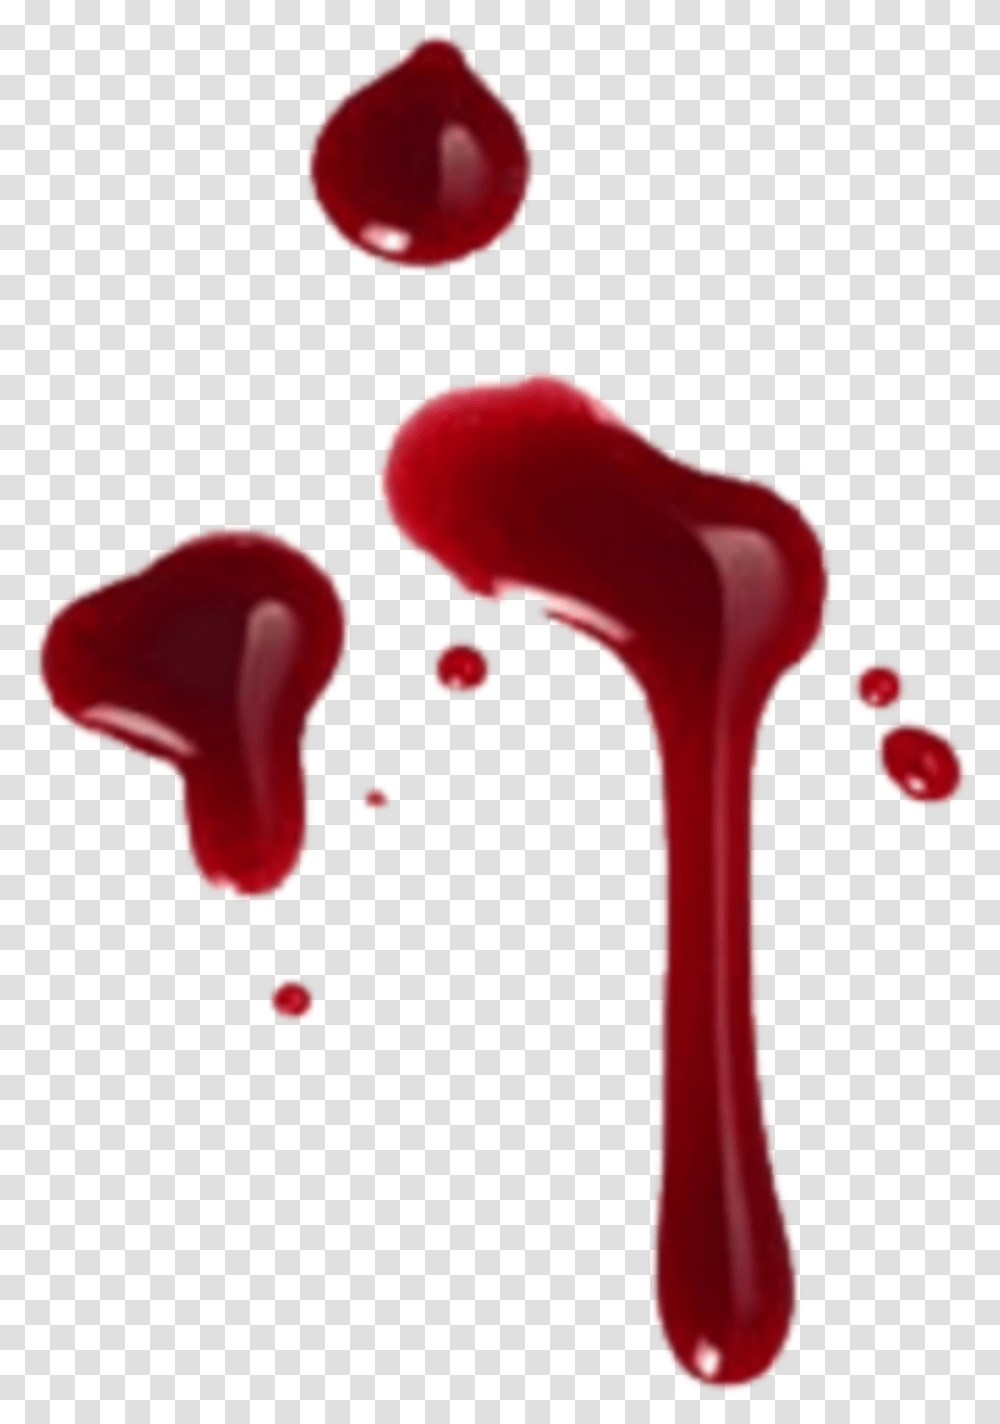 Blood Drip Available For Anything And Anyone To Us Blood Drip Overlay, Stain, Heart, Stomach Transparent Png